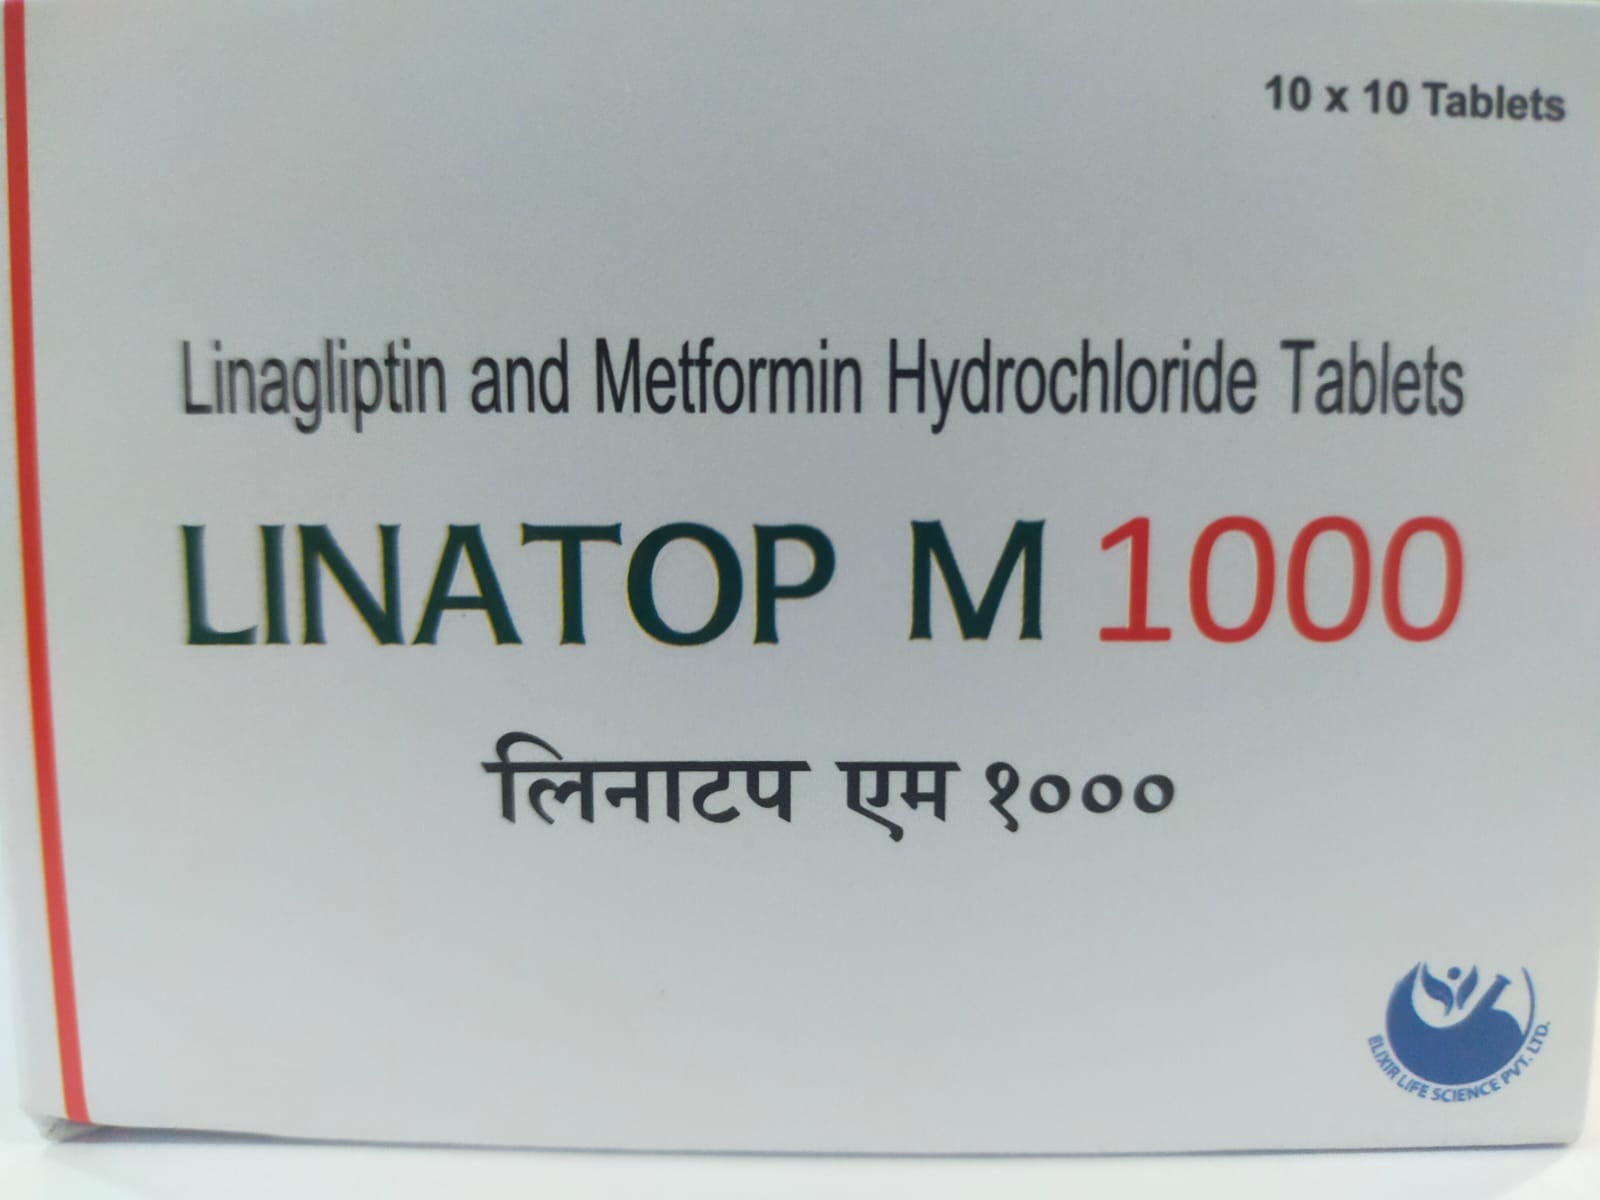 Linatop M 1000 Tablets